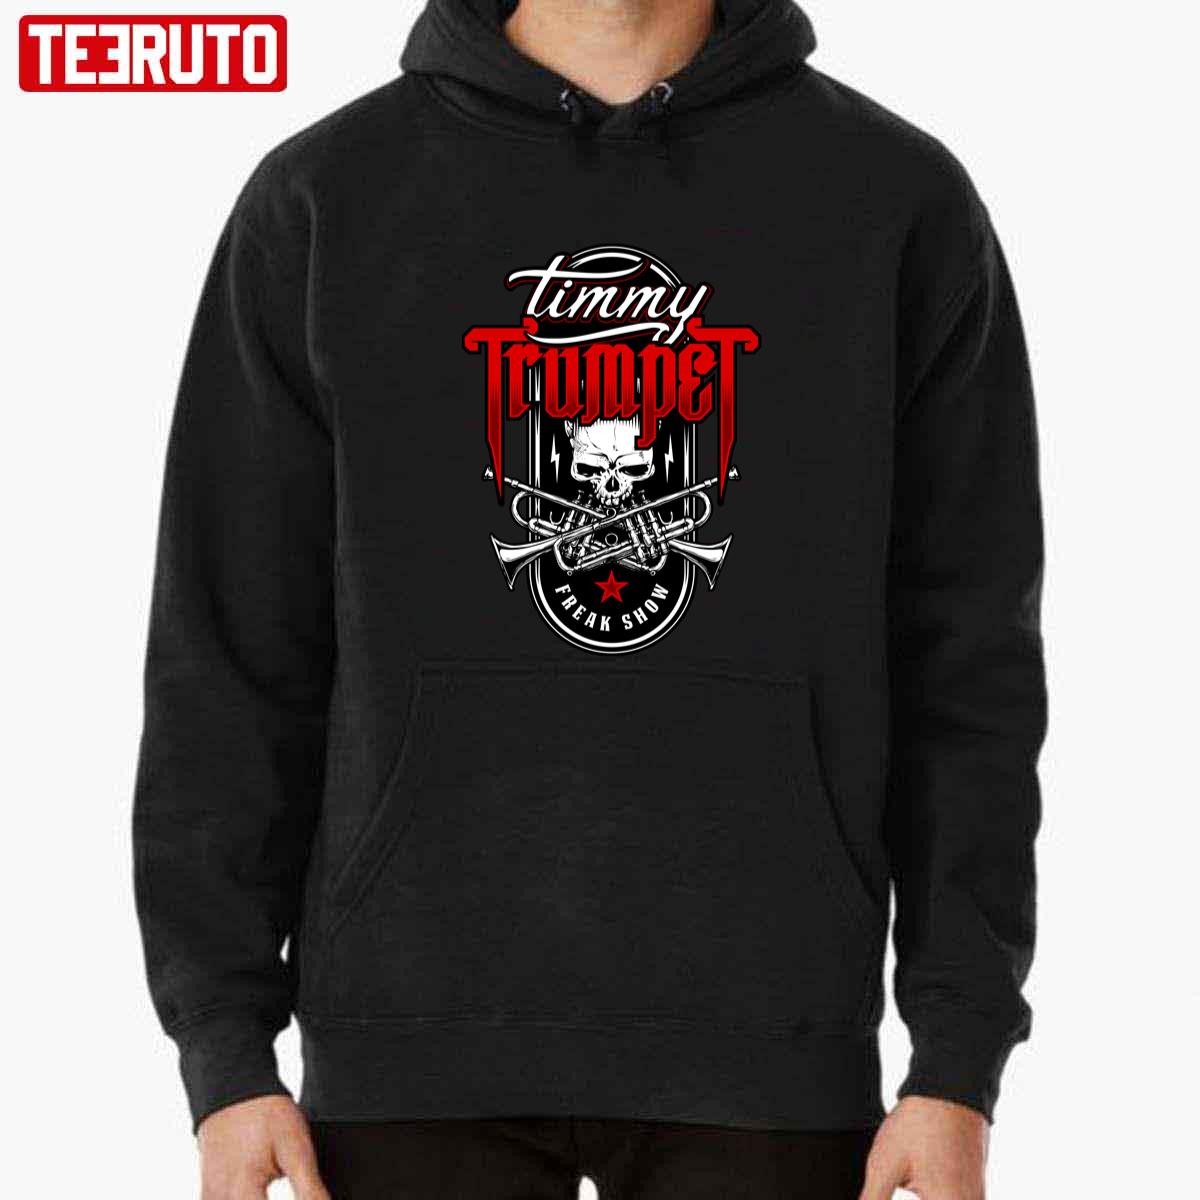  Timmy Trumpet Sweatshirt : Clothing, Shoes & Jewelry